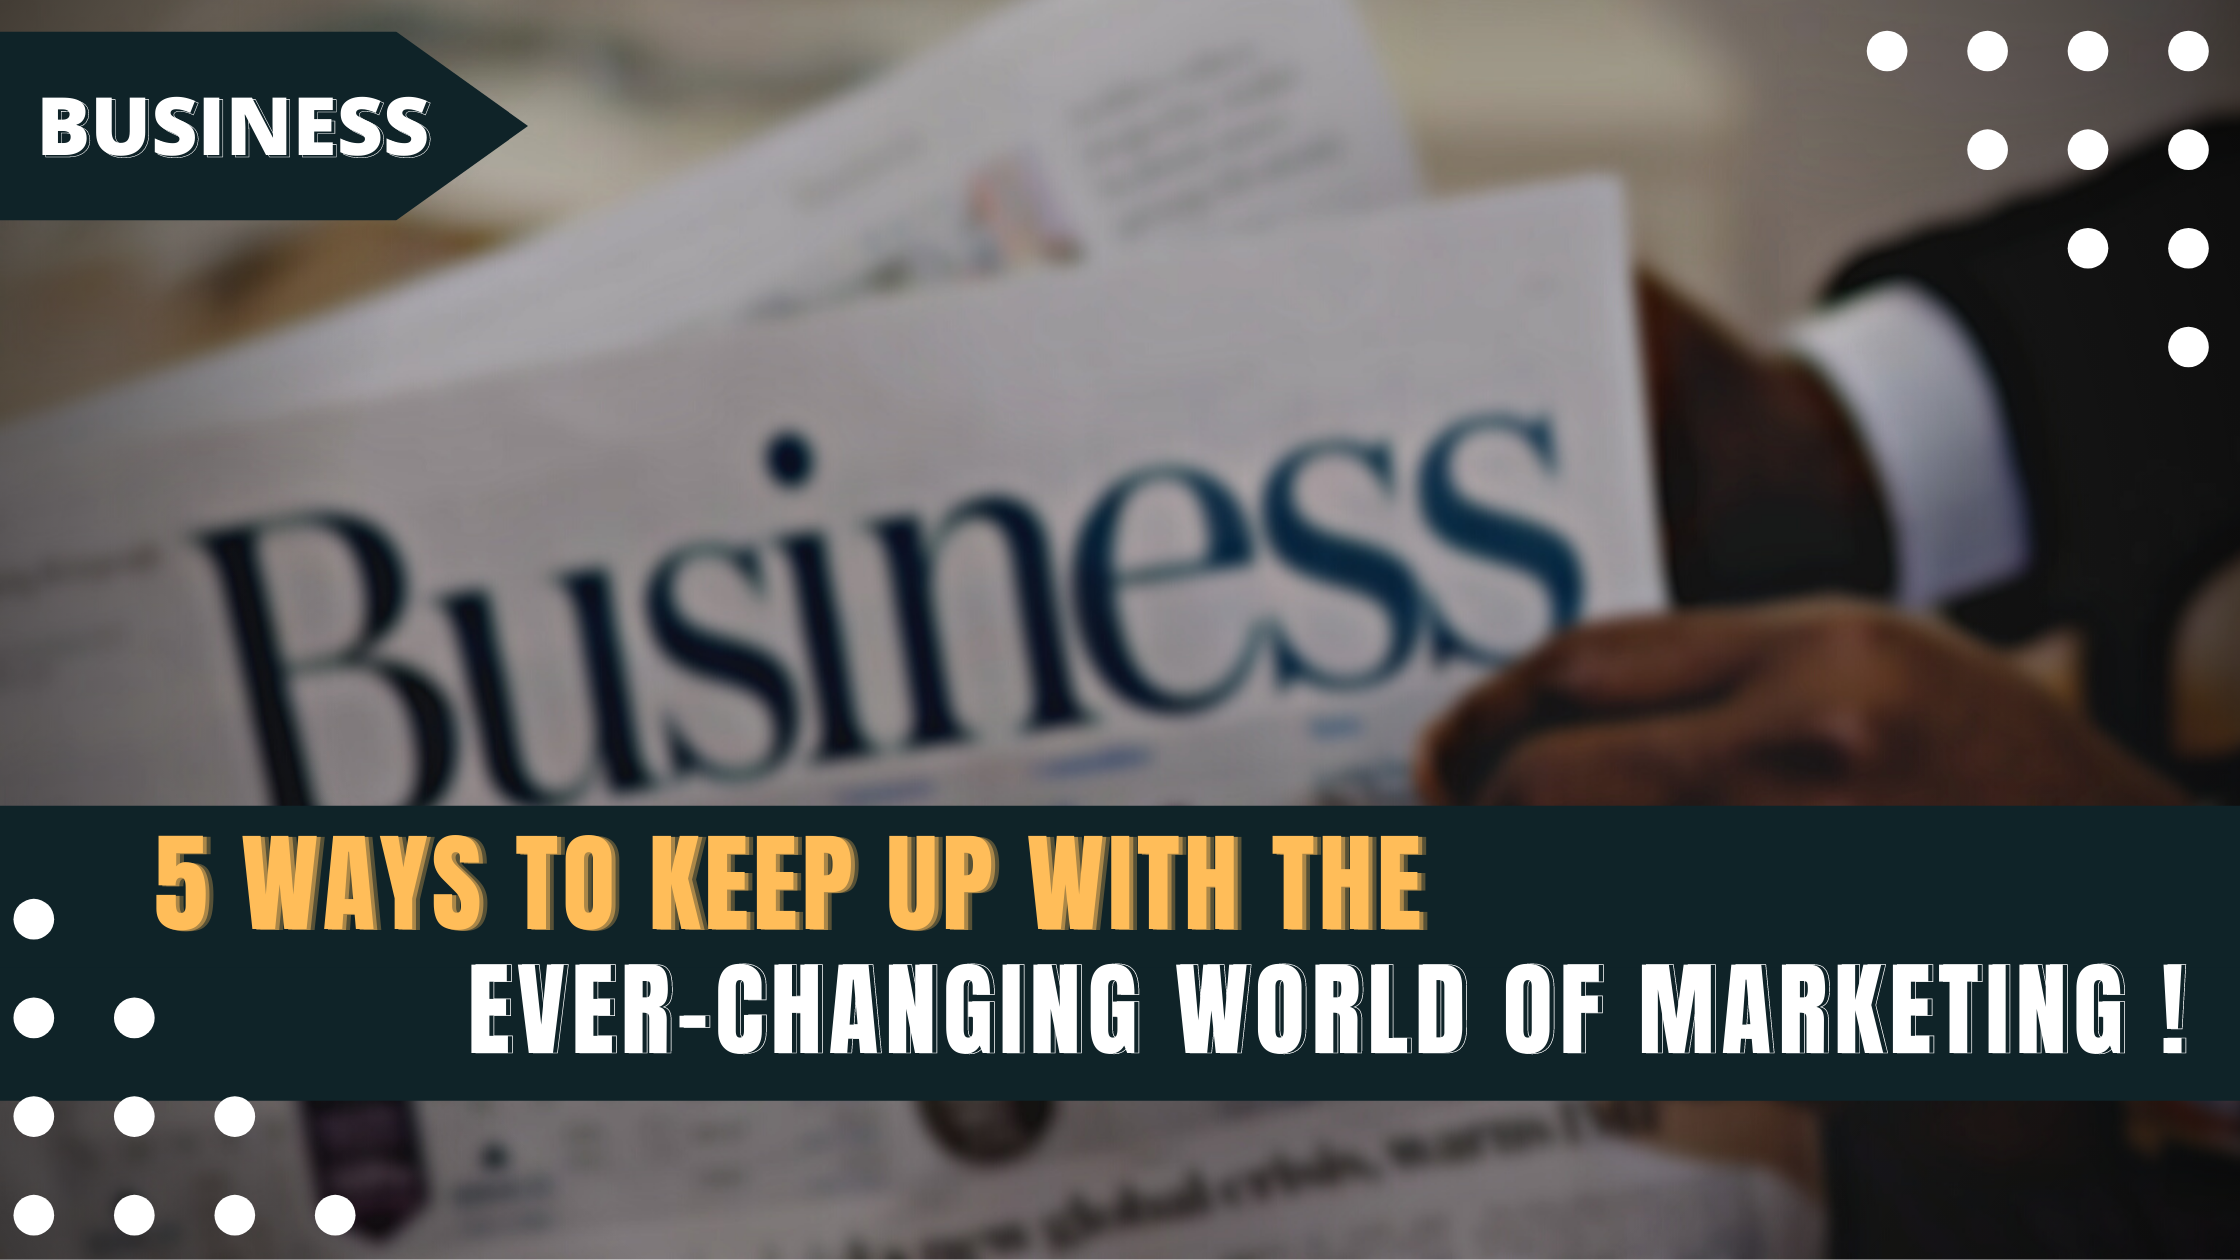 5 ways to keep up with the ever-changing world of marketing!